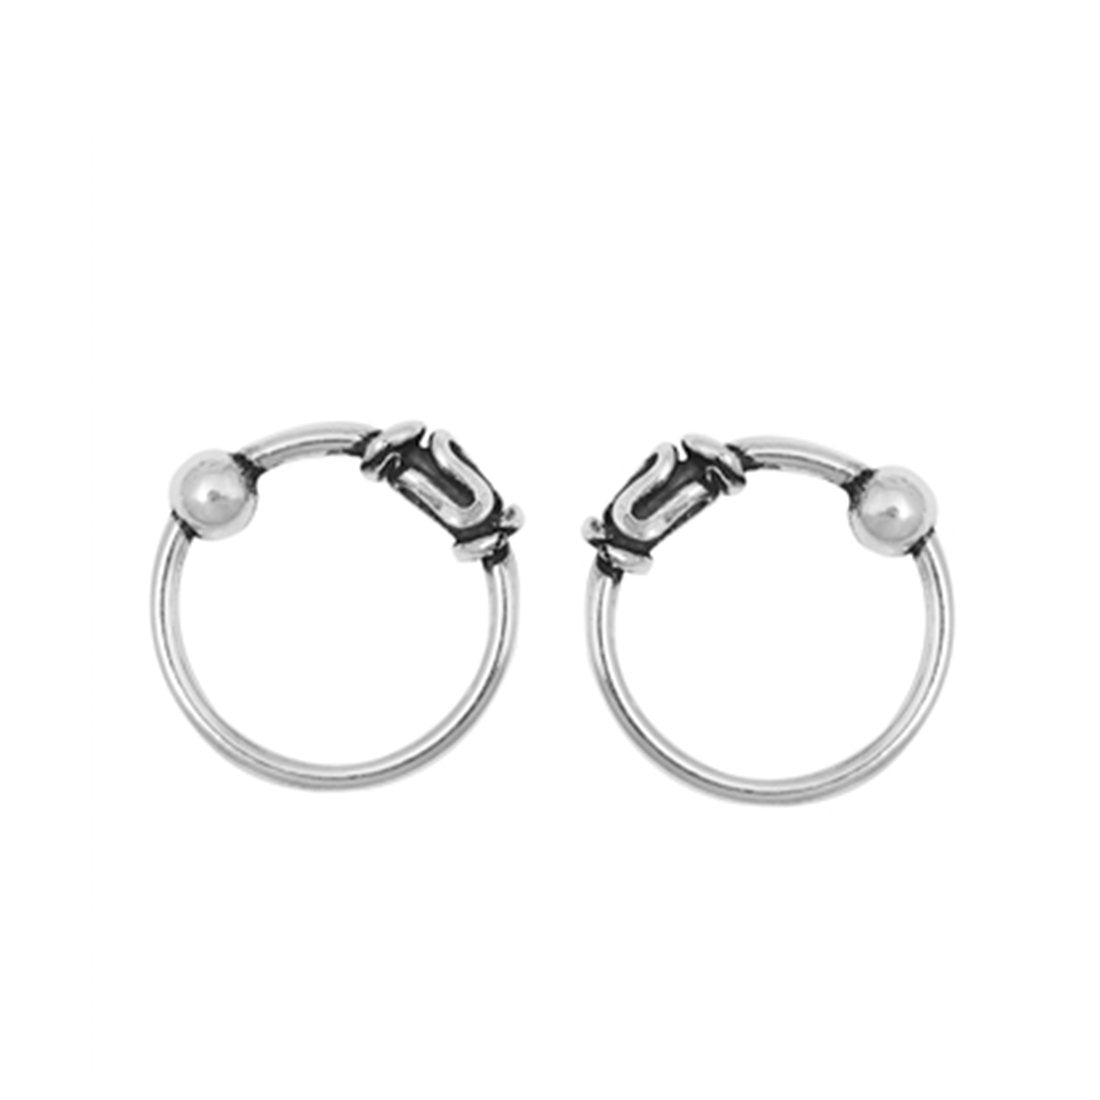 Silver Hoop Nose Stud Ring Bali Round 925 Sterling Silver